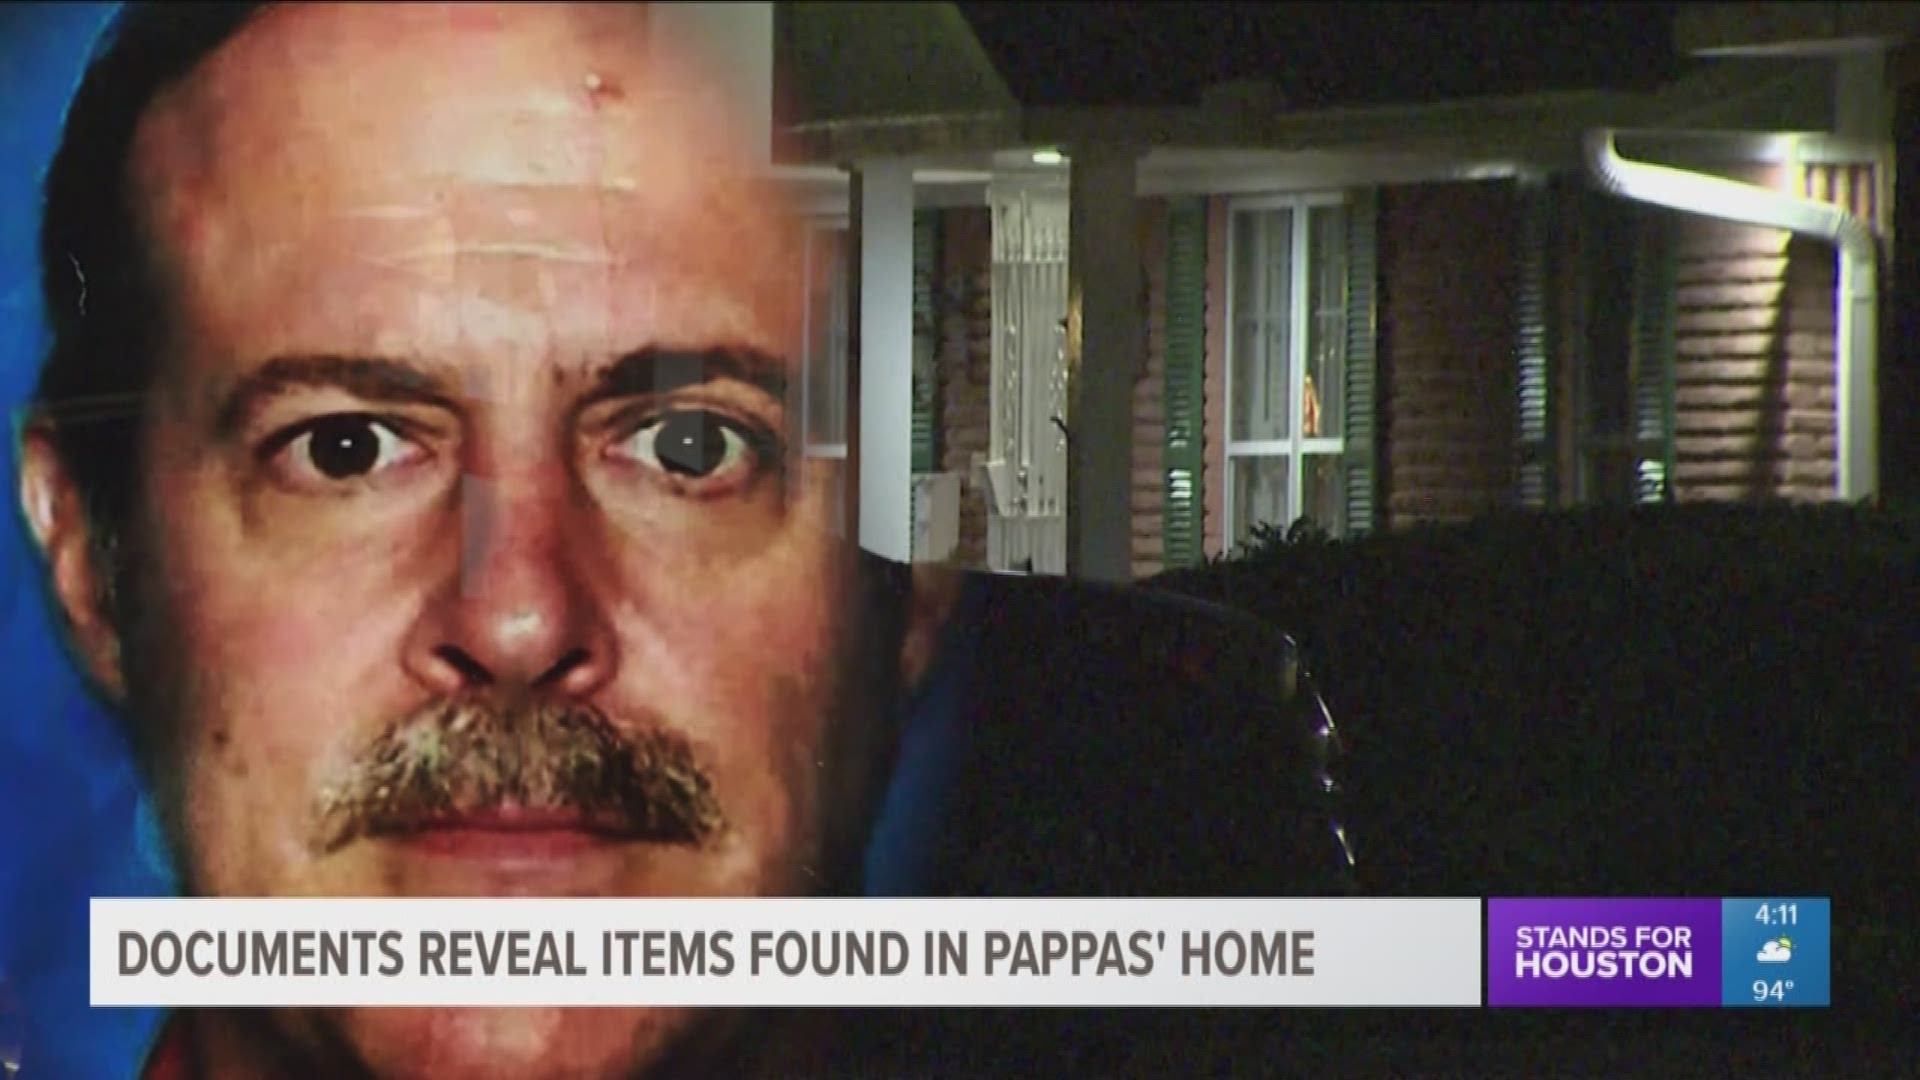 The murder charge issued for Joseph Pappas shows new insight into how Pappas was getting his affairs in order after the murder of Dr. Mark Hausknecht.